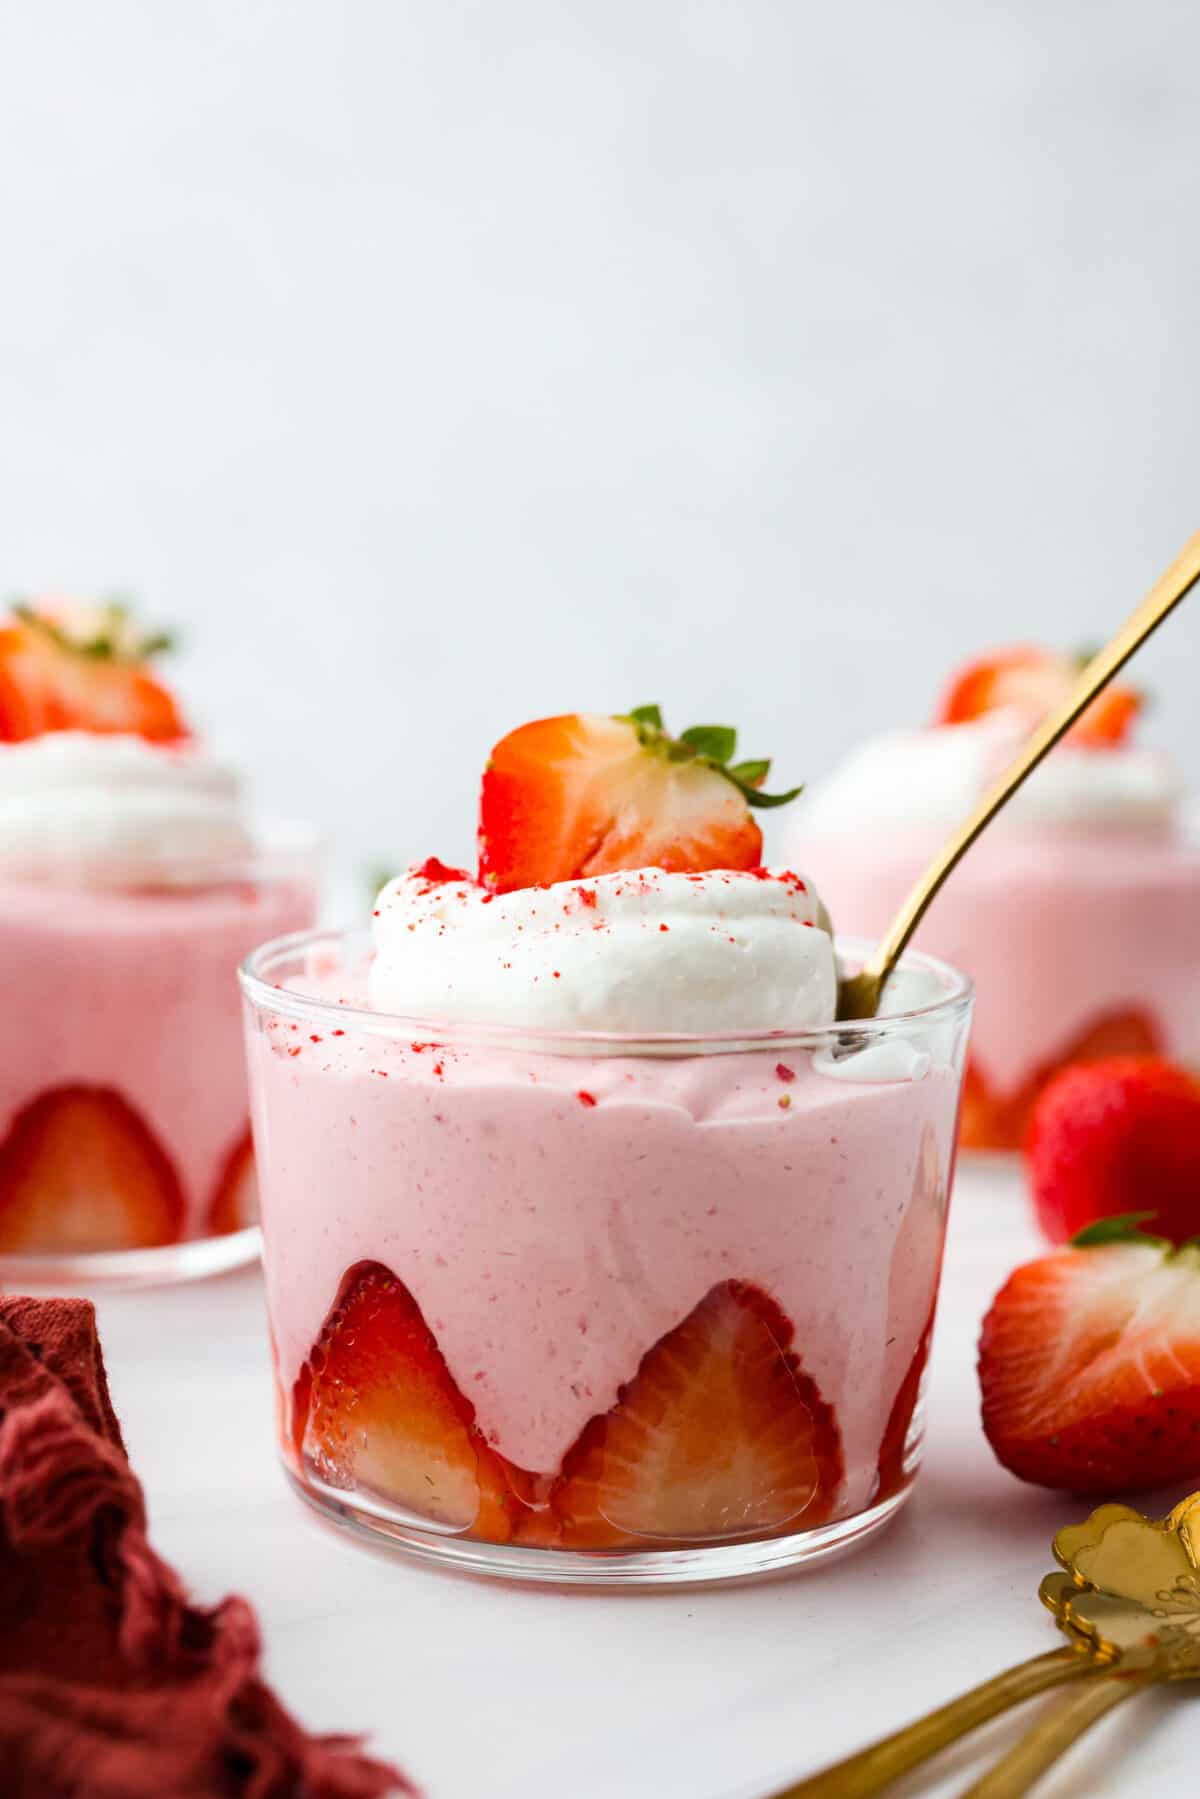 Strawberry mousse in a glass cup lined with sliced strawberries.